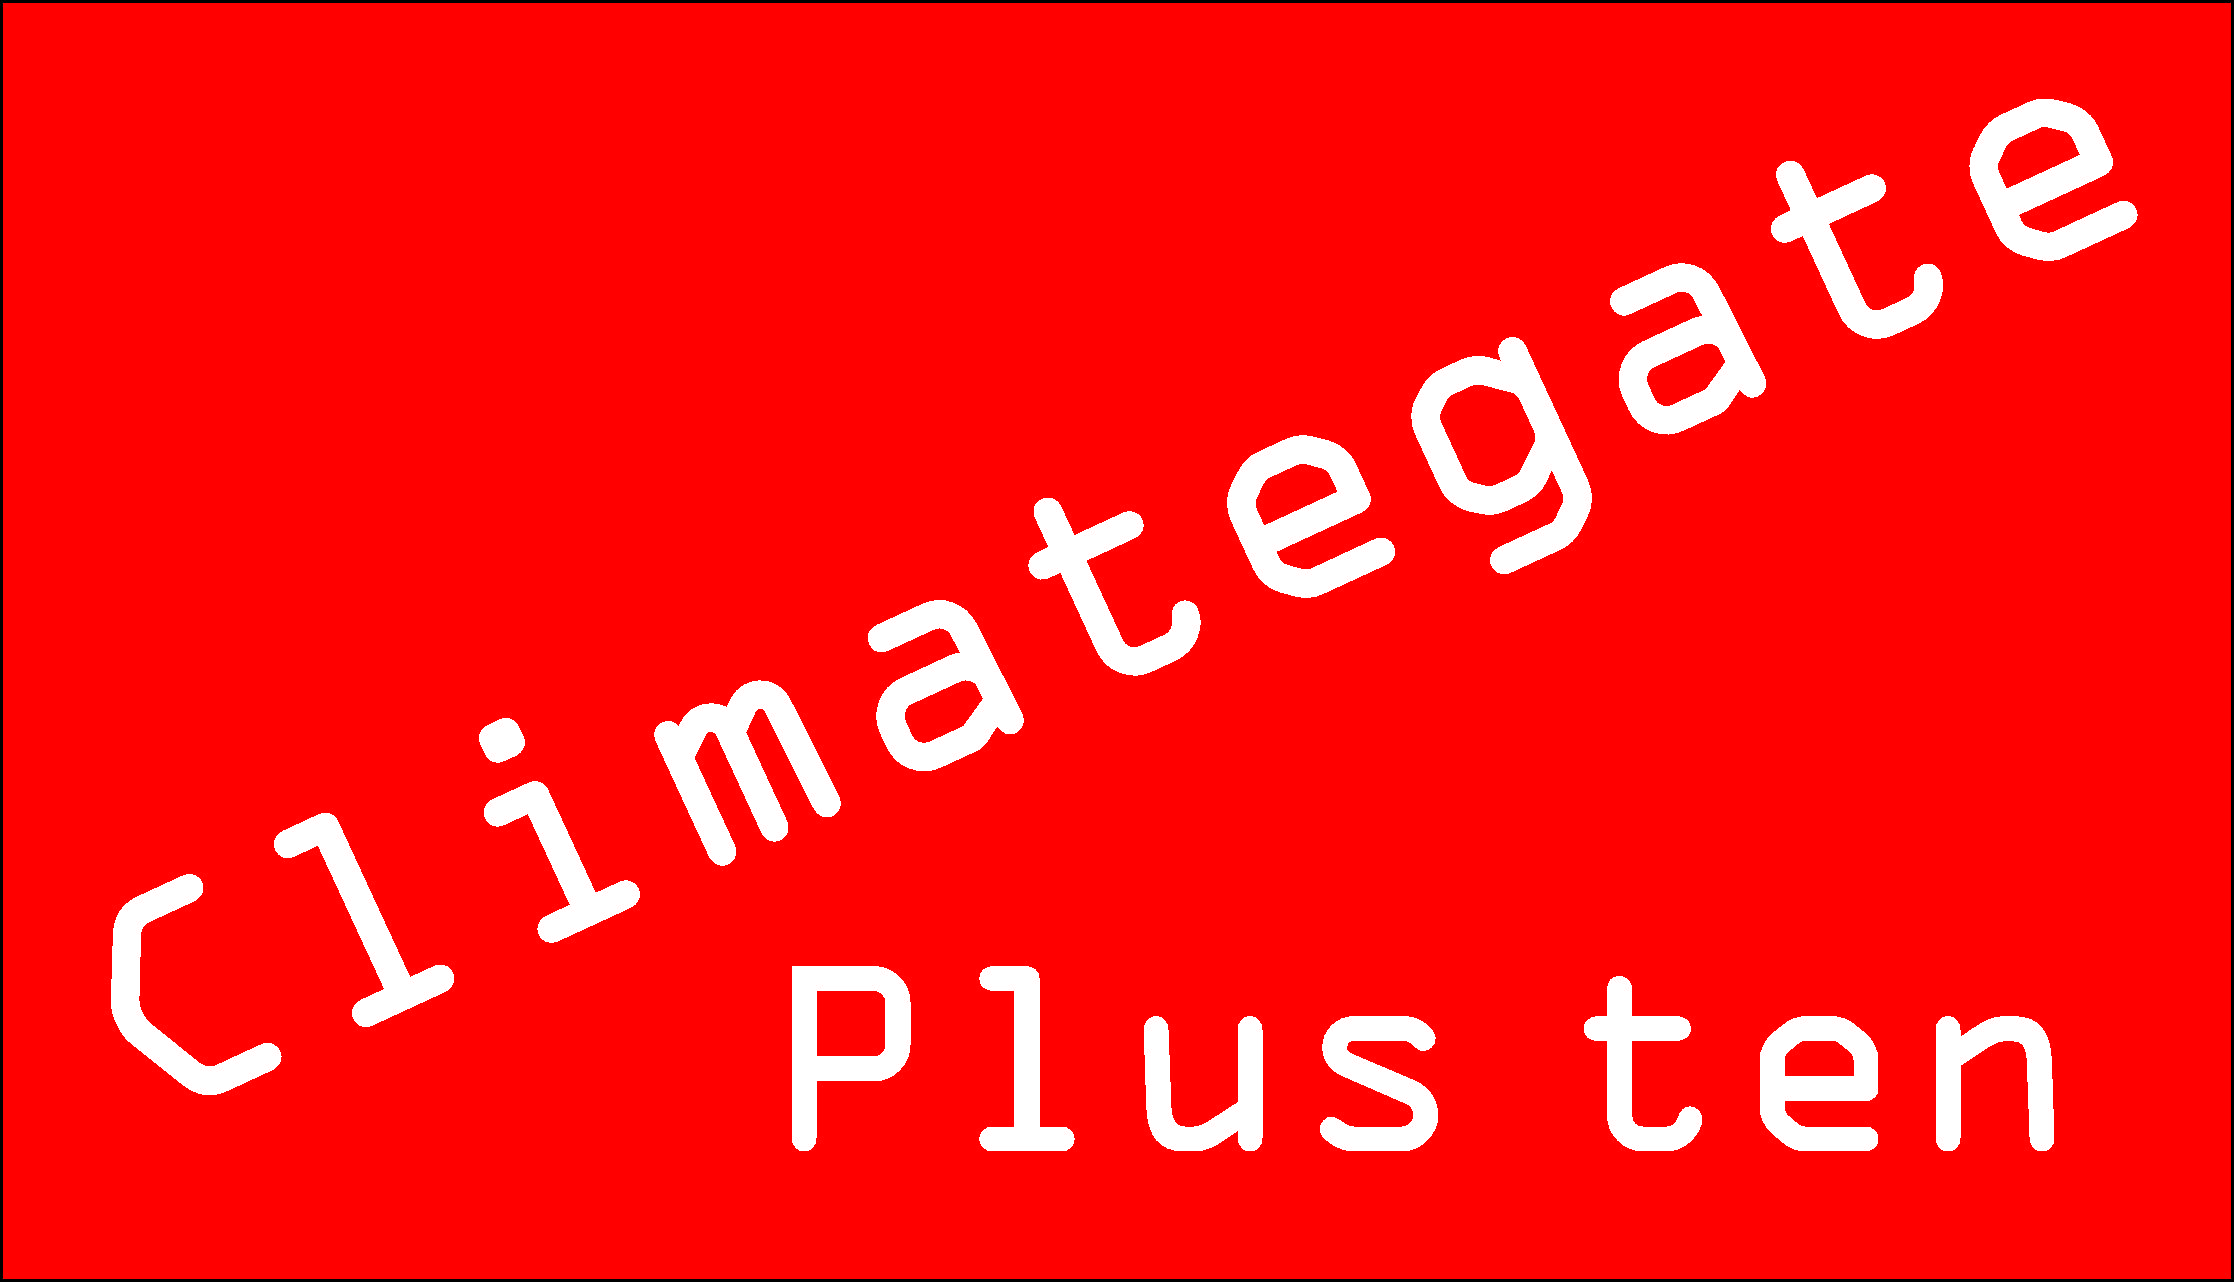 Climategate: Ten years later